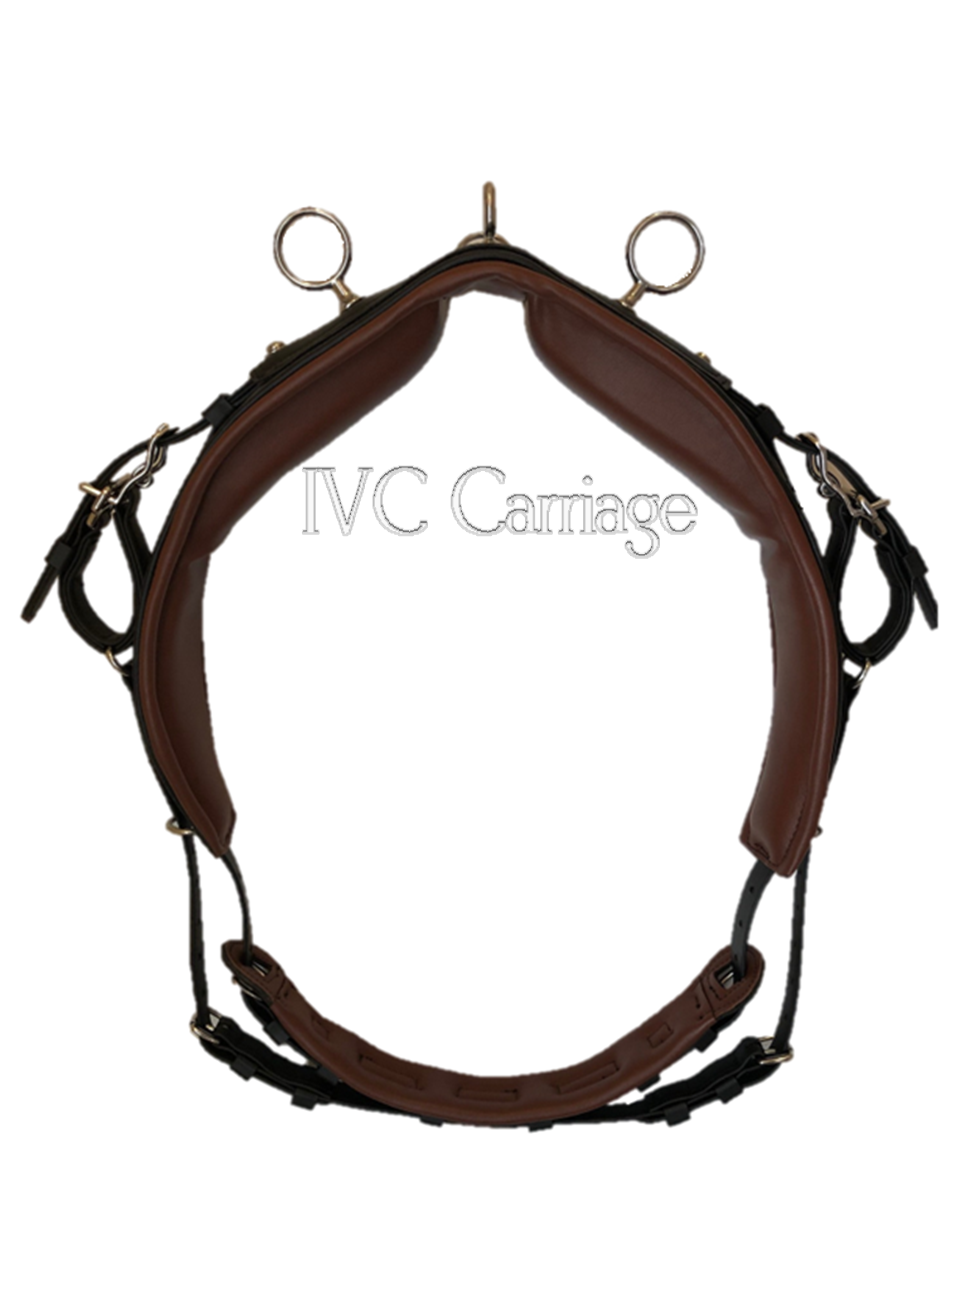 IVC Extra Endura Synthetic Harness Saddle | IVC Carriage